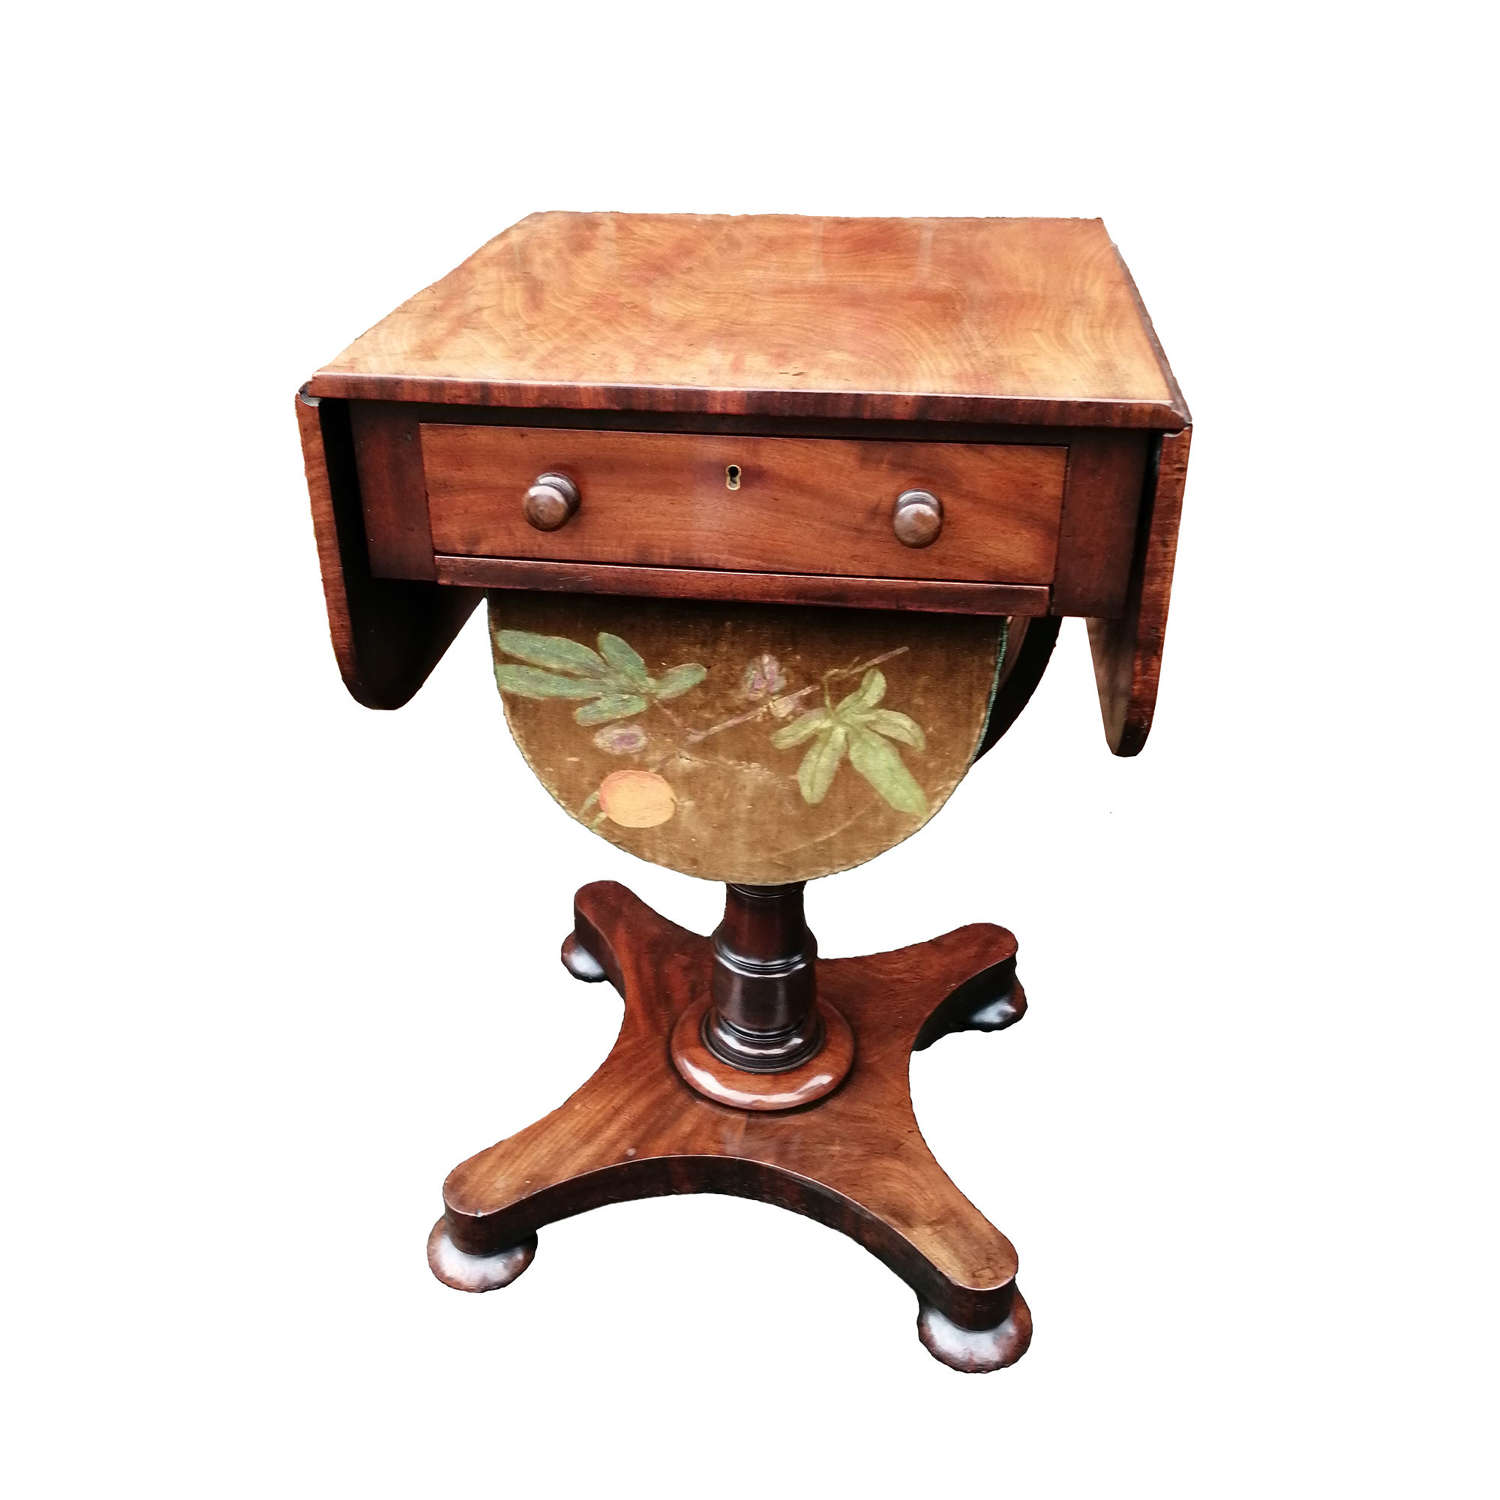 A fine quality William IV period work/sewing table